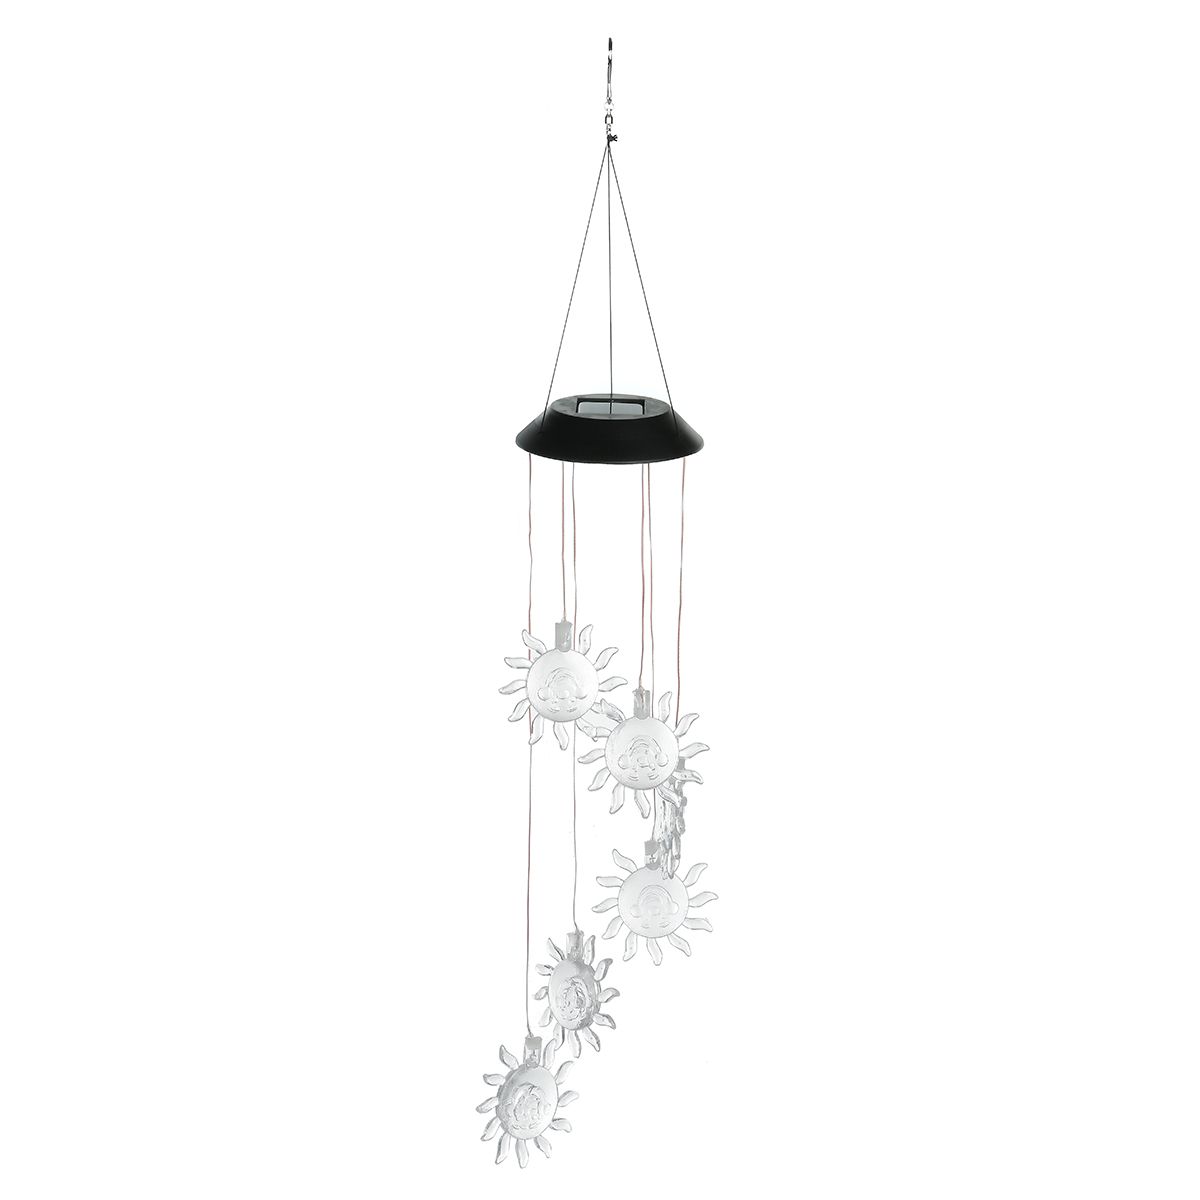 Color-Changing-LED-Solar-Powered-Wind-Chime-Light-Hanging-Garden-Yard-Decor-1760795